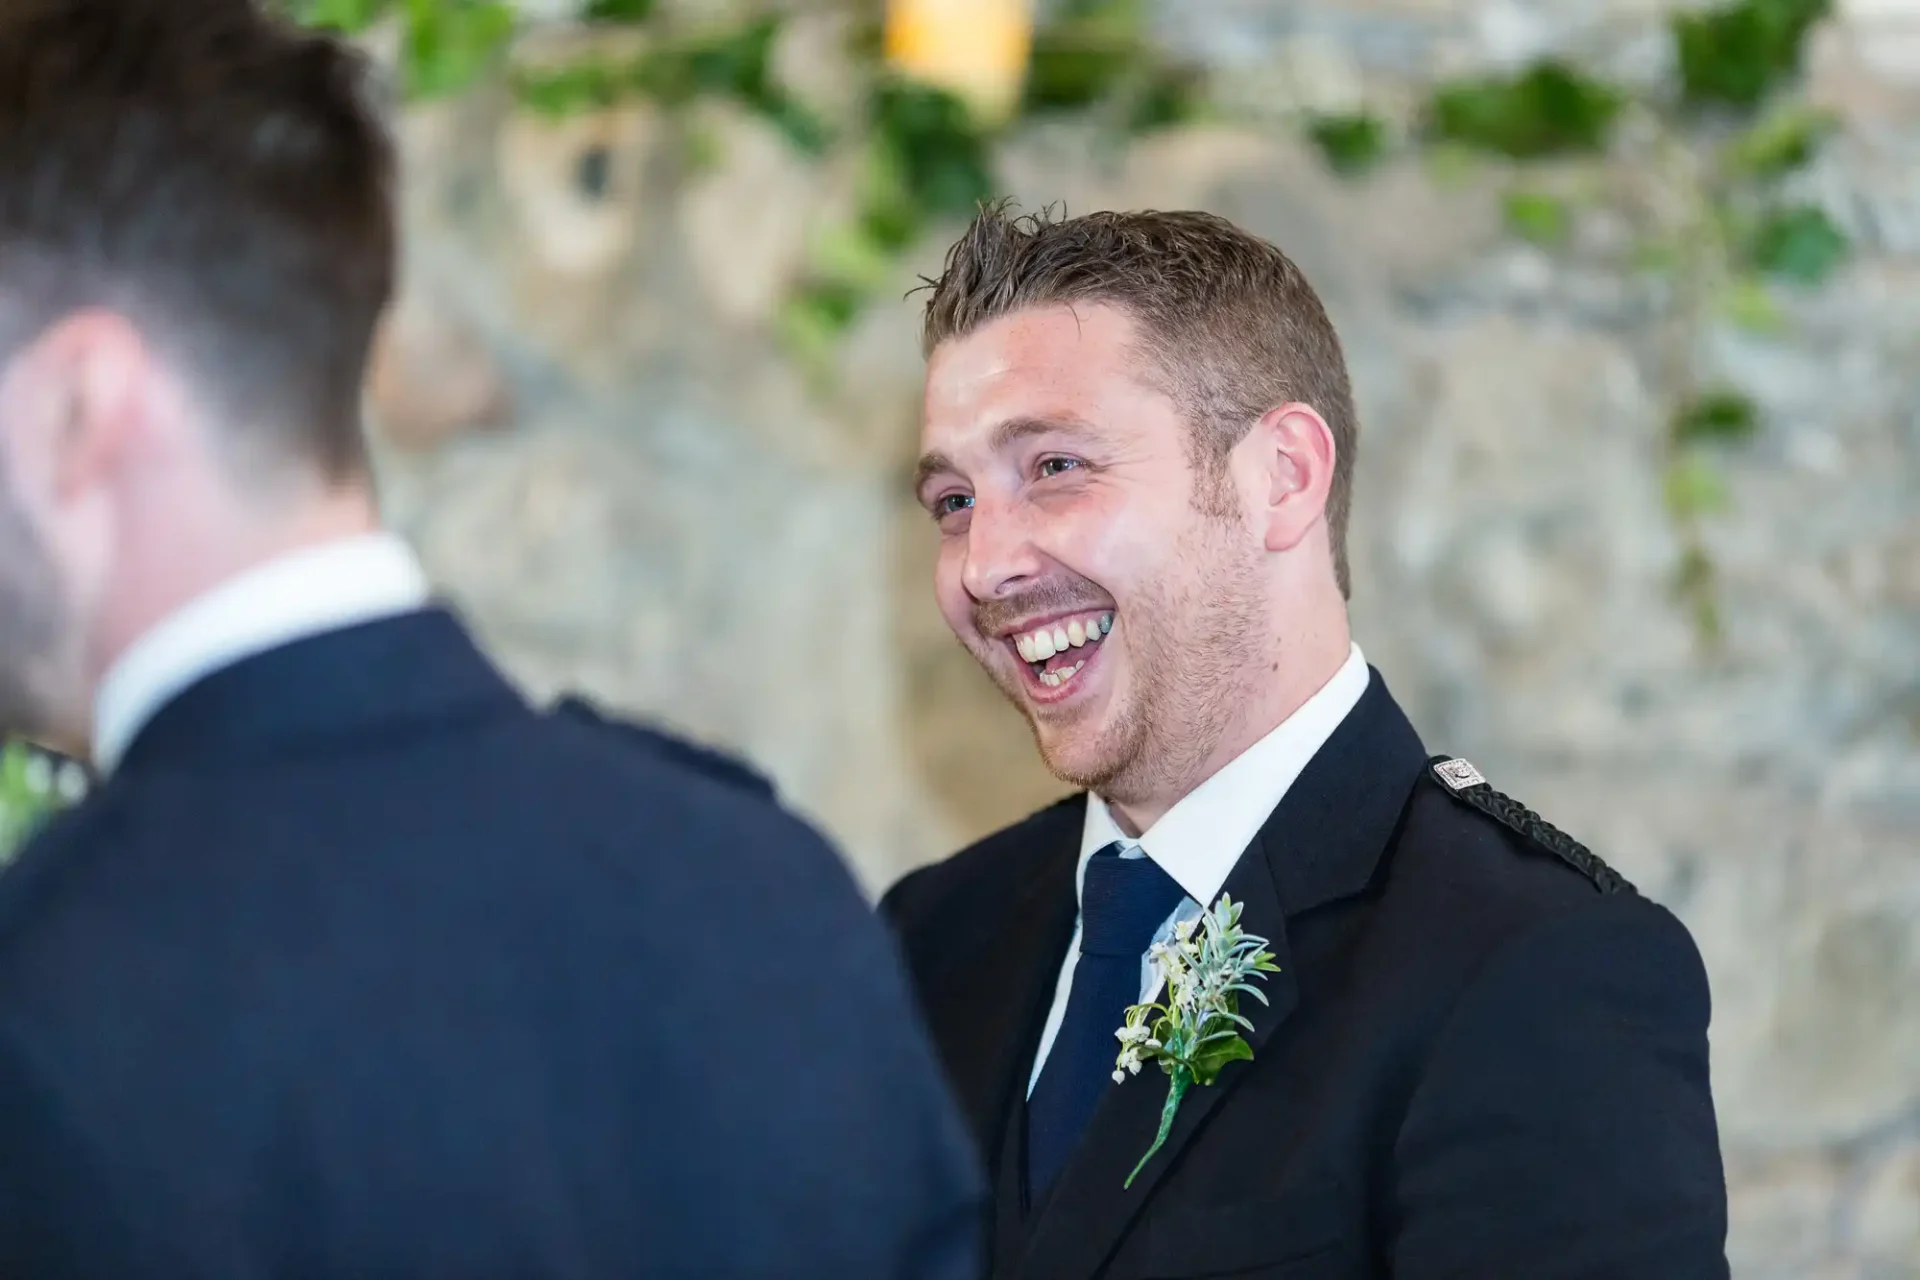 Man in a suit with a boutonniere laughing joyfully at a wedding event, facing another man with his back turned to the camera.